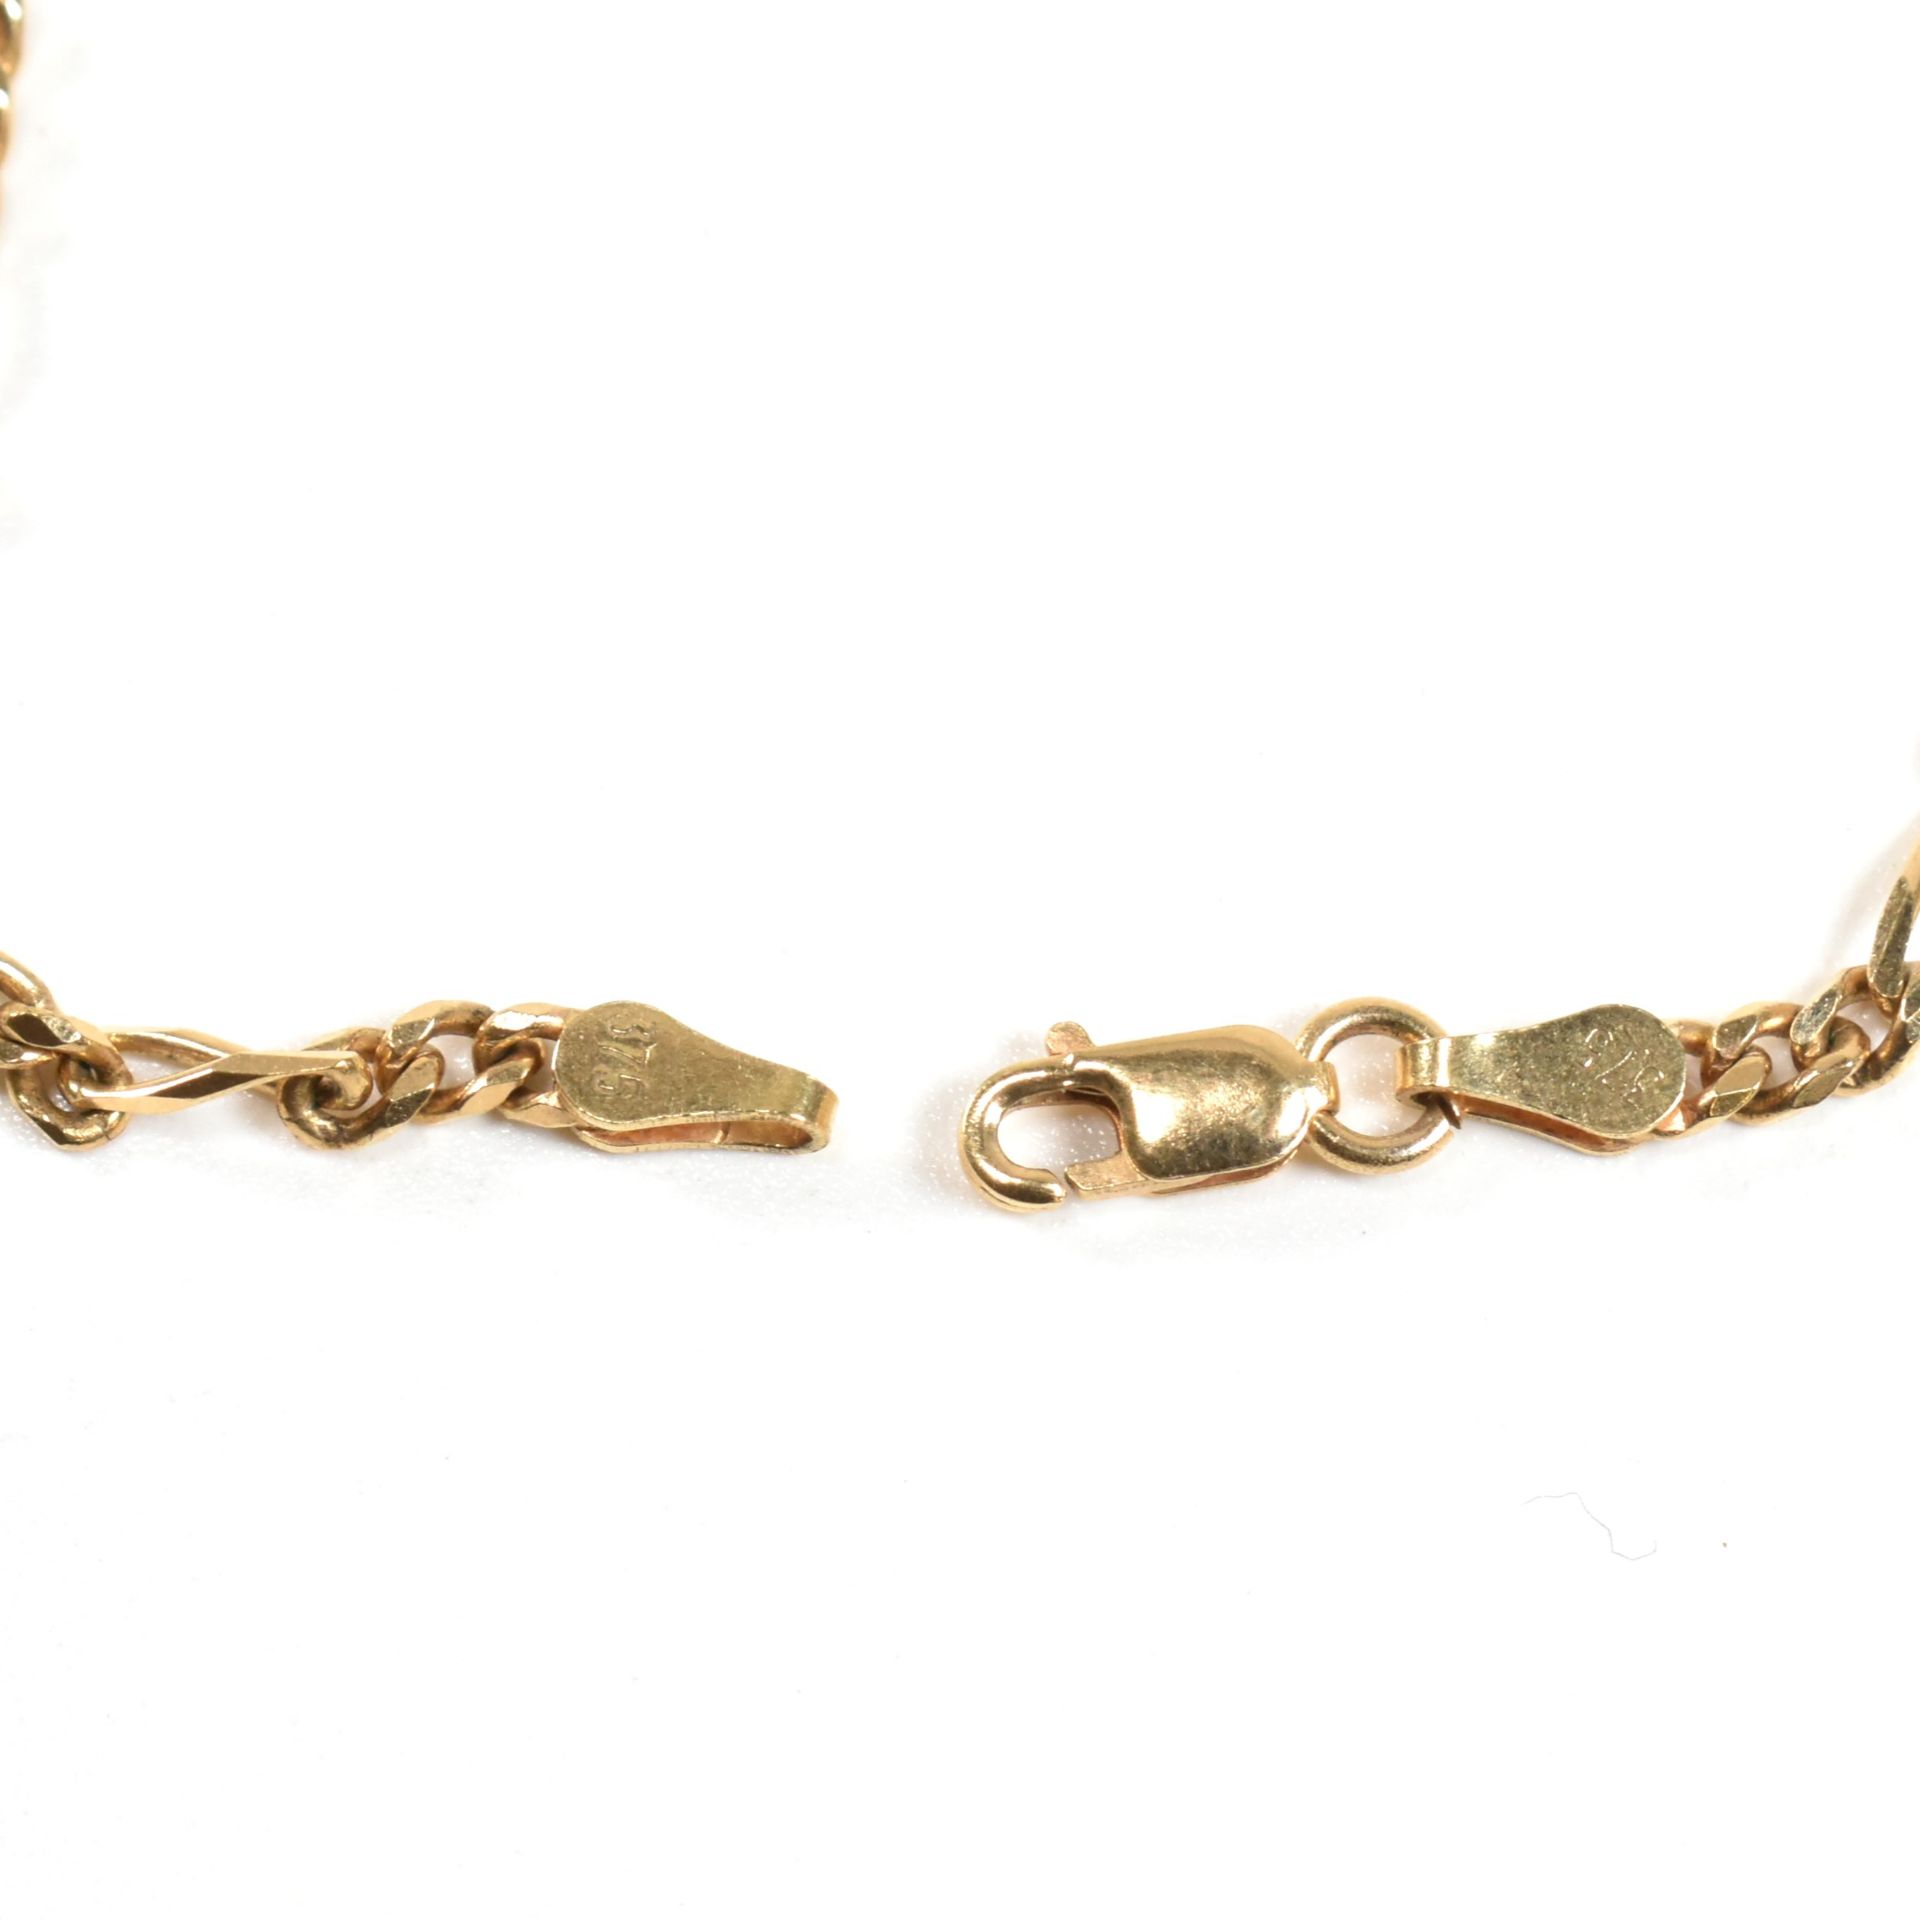 9CT GOLD FIGARO CHAIN LINK NECKLACE - Image 5 of 6